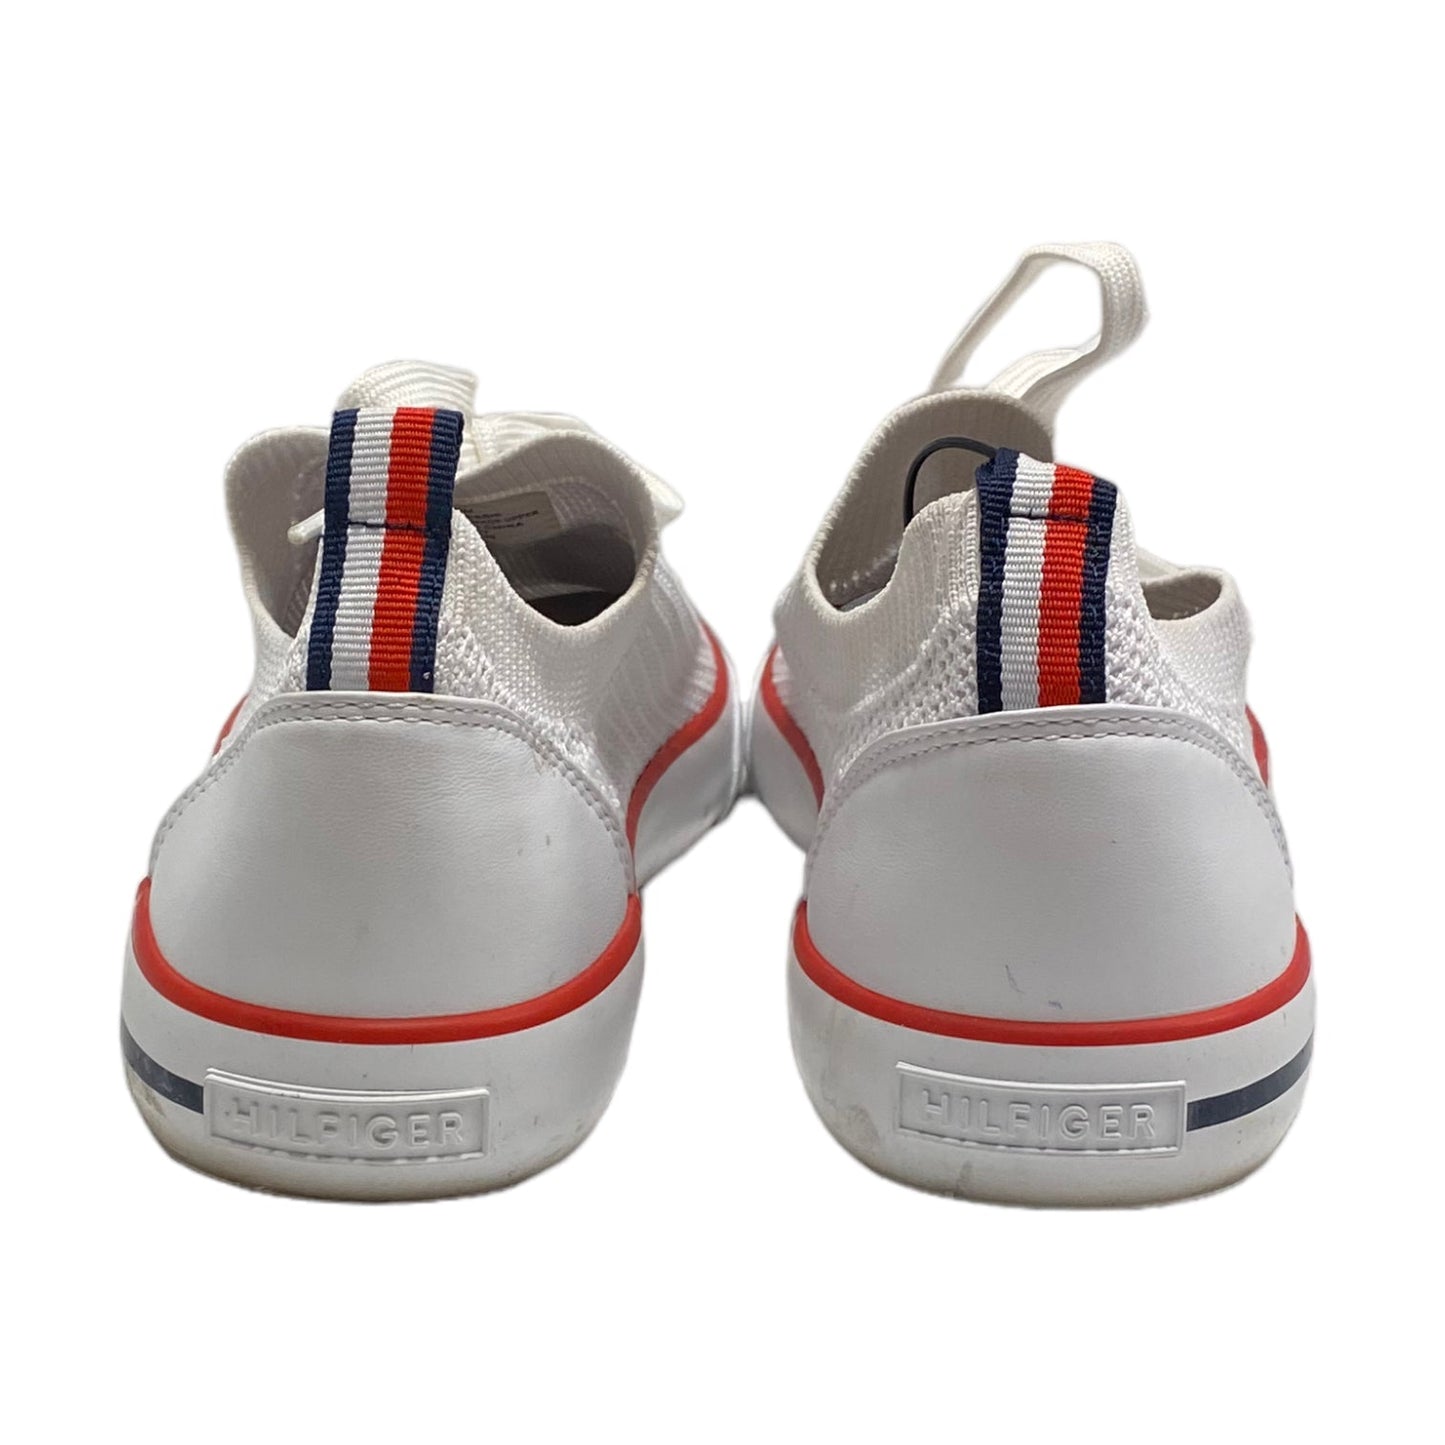 Shoes Sneakers By Tommy Hilfiger  Size: 10